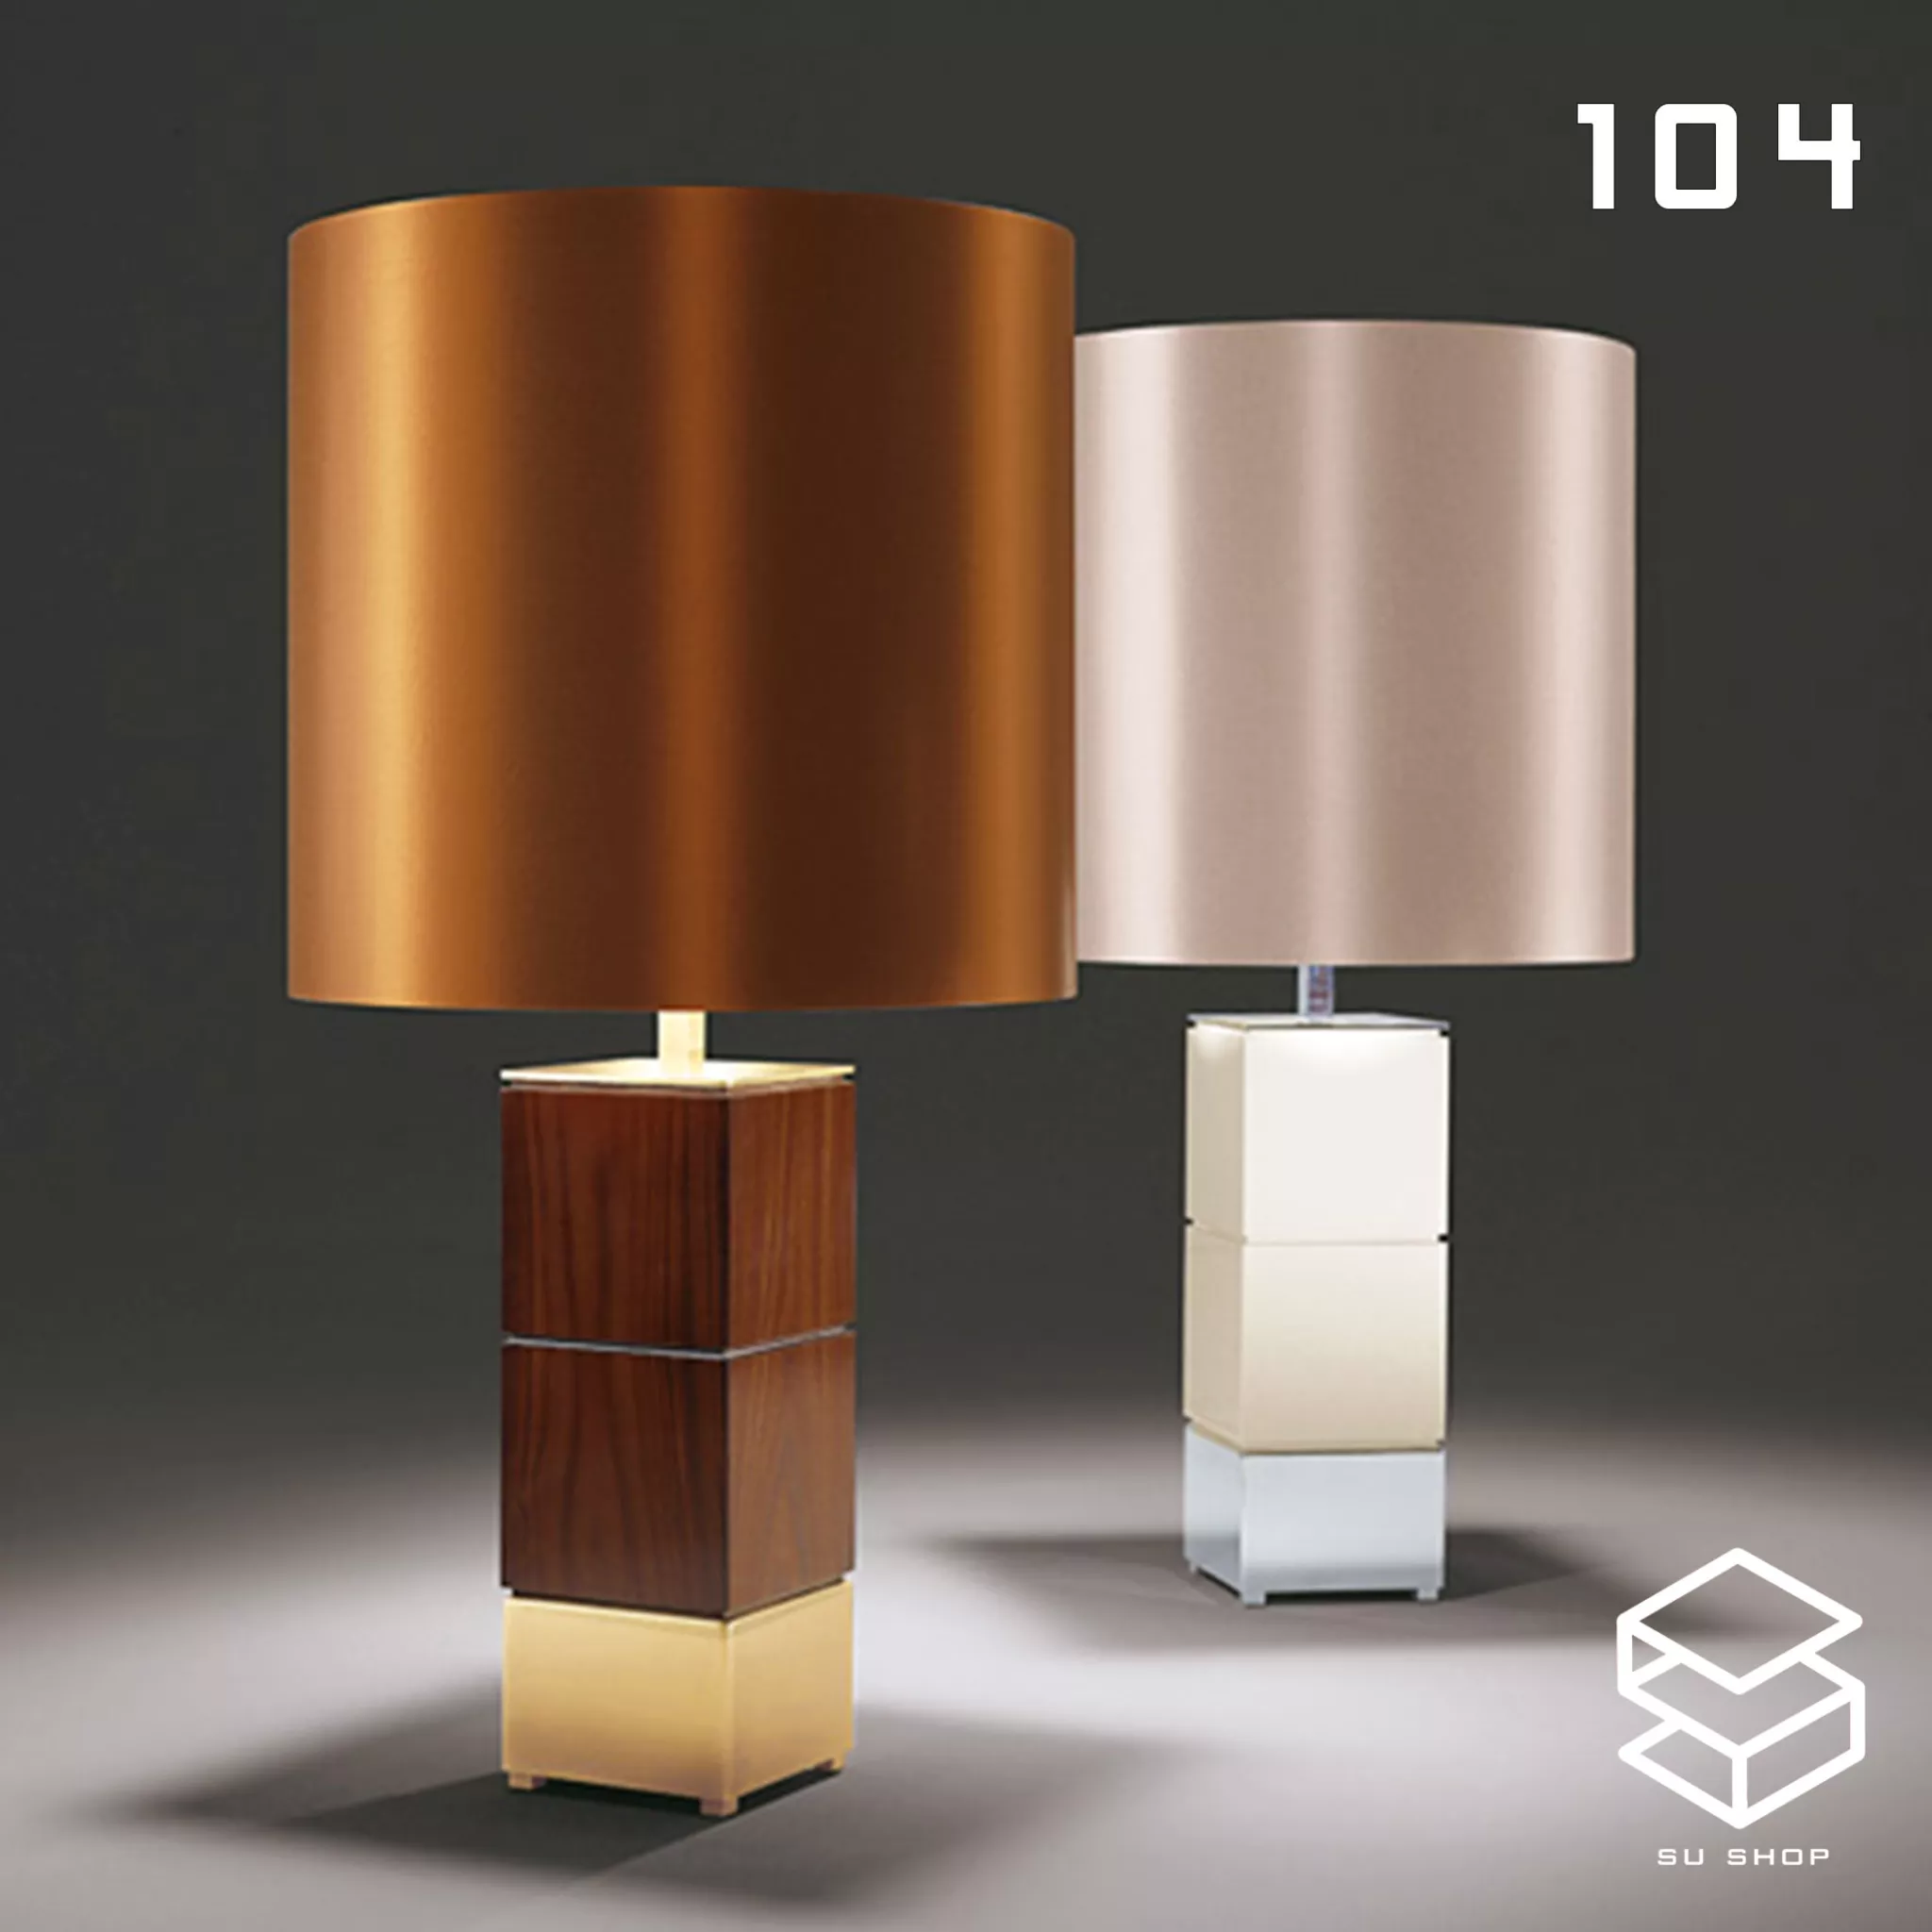 MODERN TABLE LAMP - SKETCHUP 3D MODEL - VRAY OR ENSCAPE - ID14669